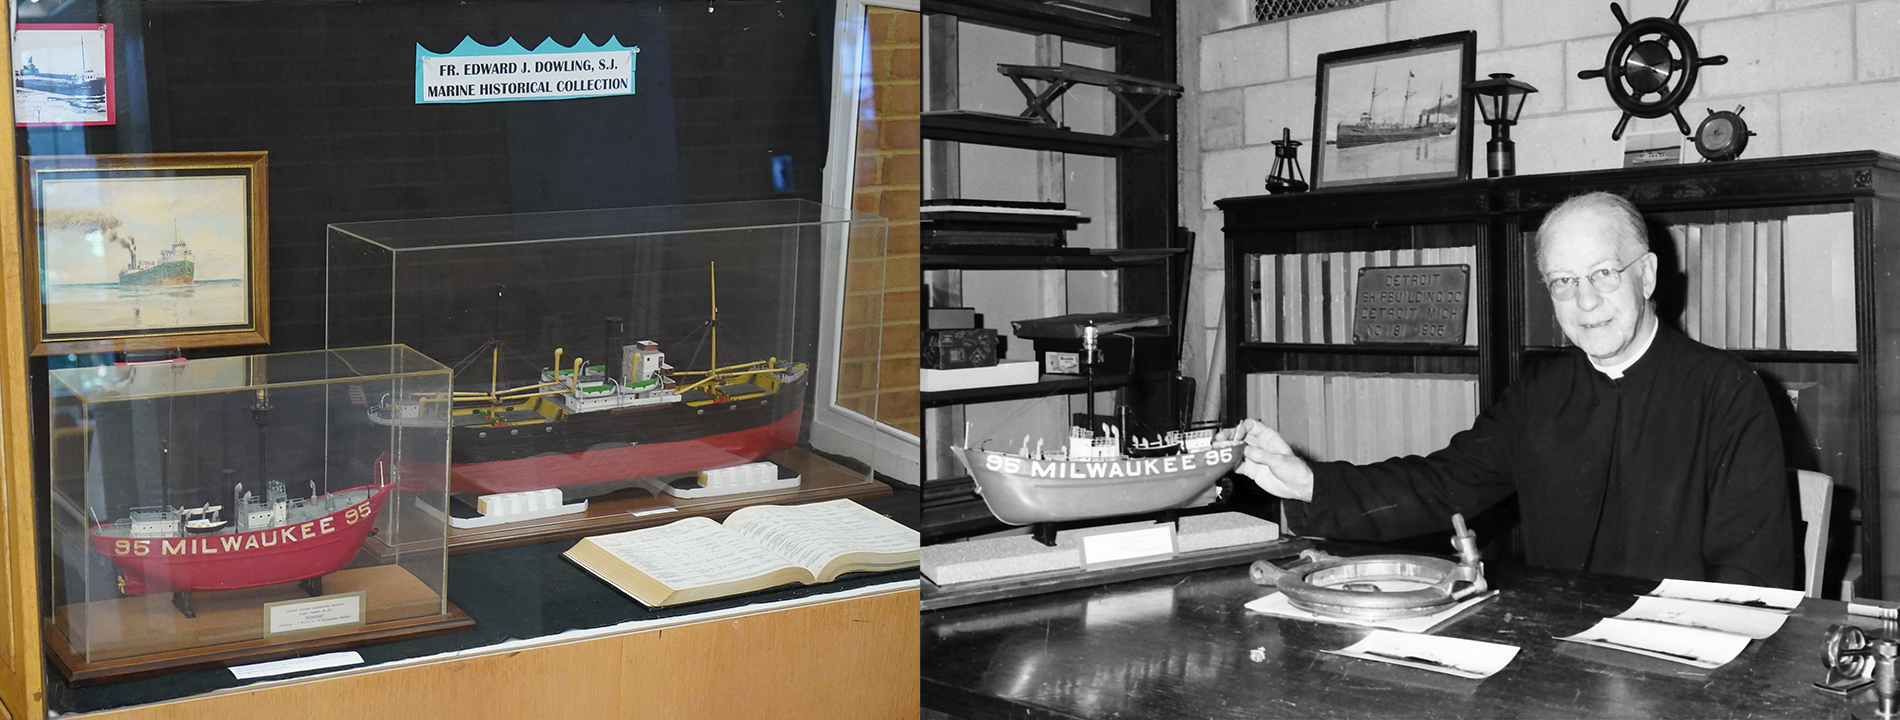 An exhibit of some of Fr. Dowling's collection on the left and Fr. Dowling himself sitting at a desk with his hand on a model ship, on the right.